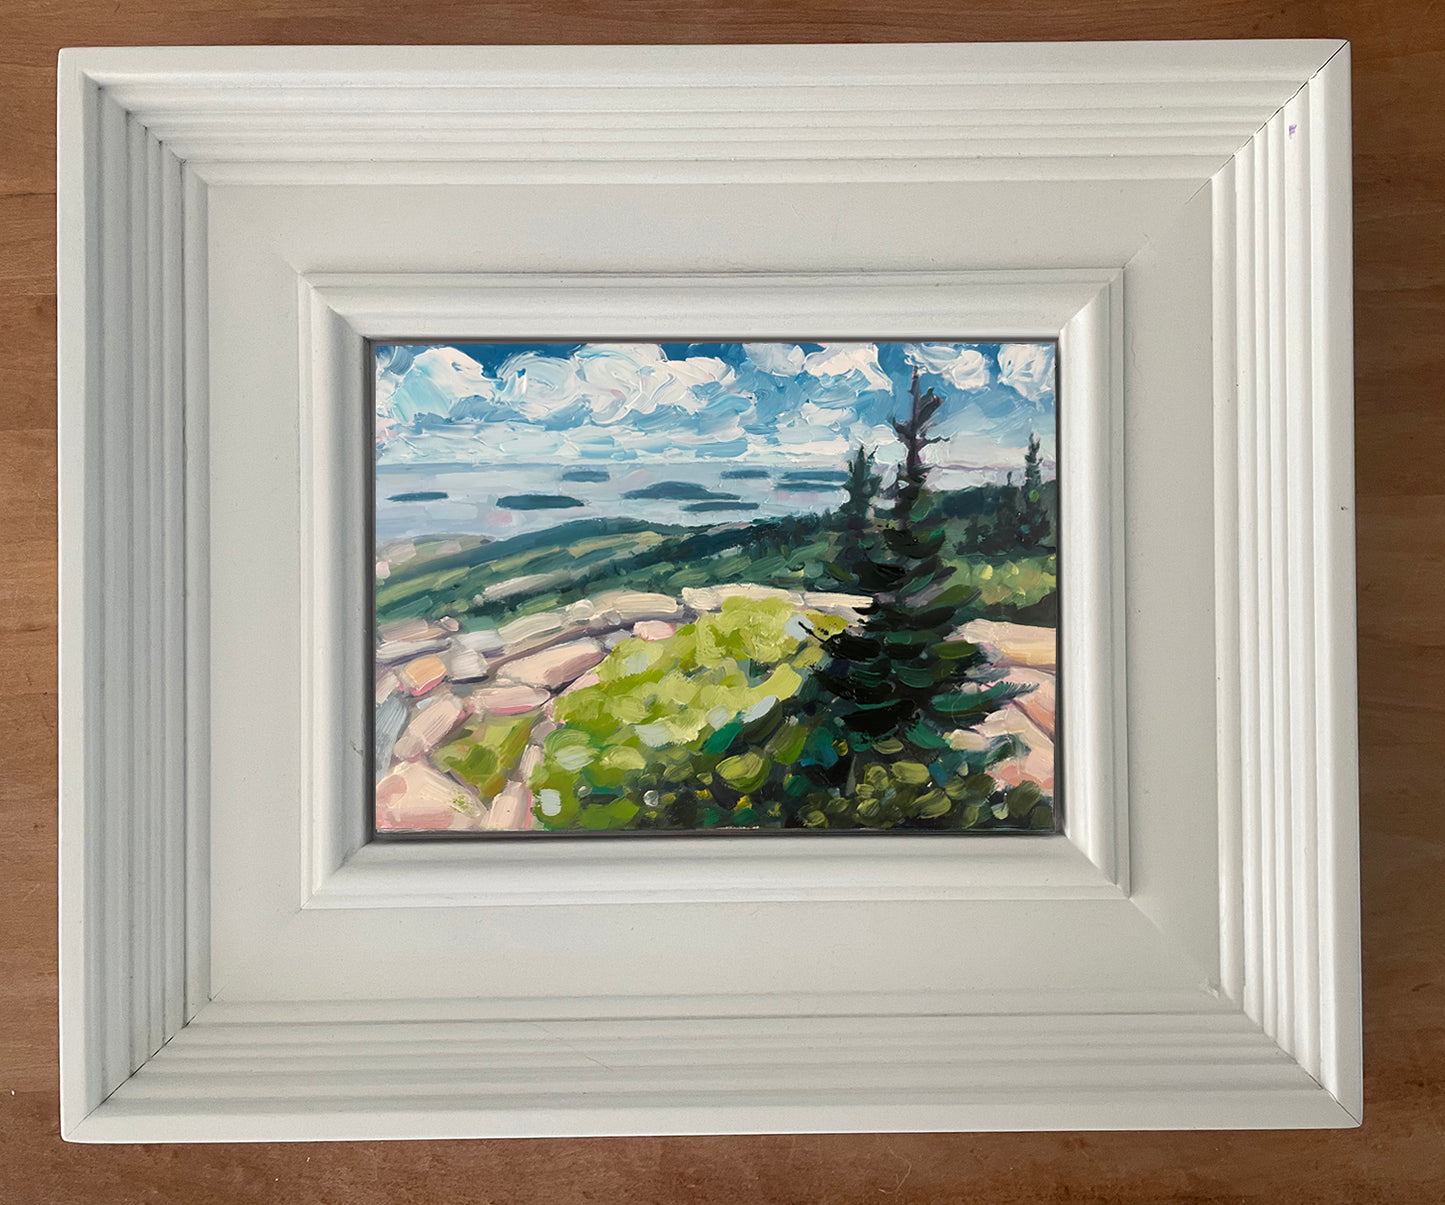 Fresh Air and Healing Vibes, Cadillac Mountain, 12.5 x 10.5 inches framed